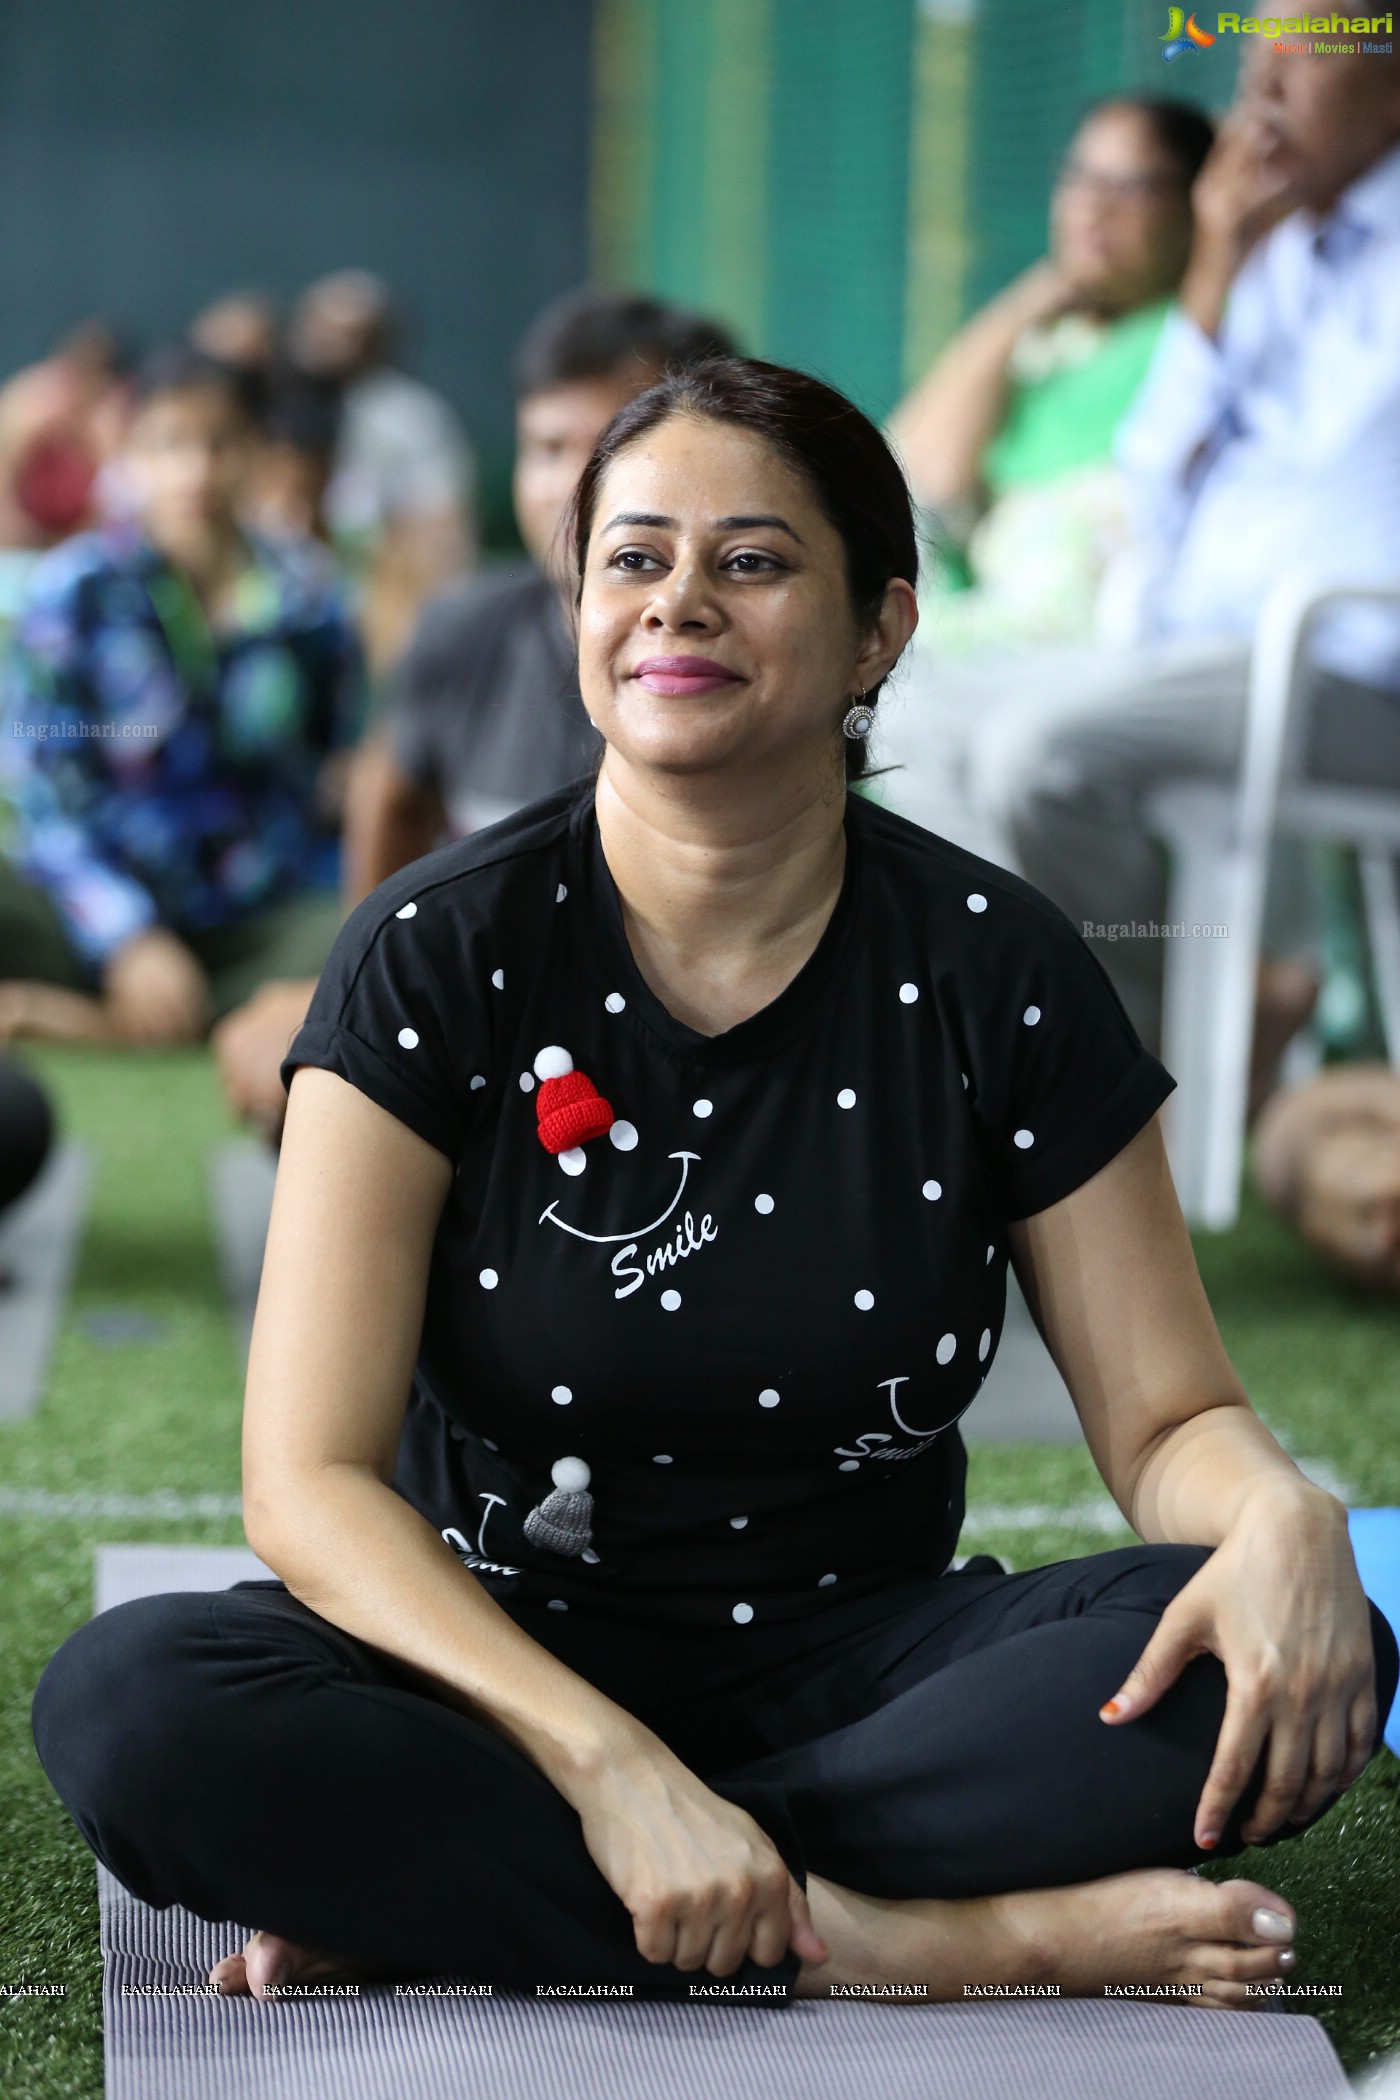 Yoga Under The Moon at Bend-It Sports Turf, Jubilee Hills